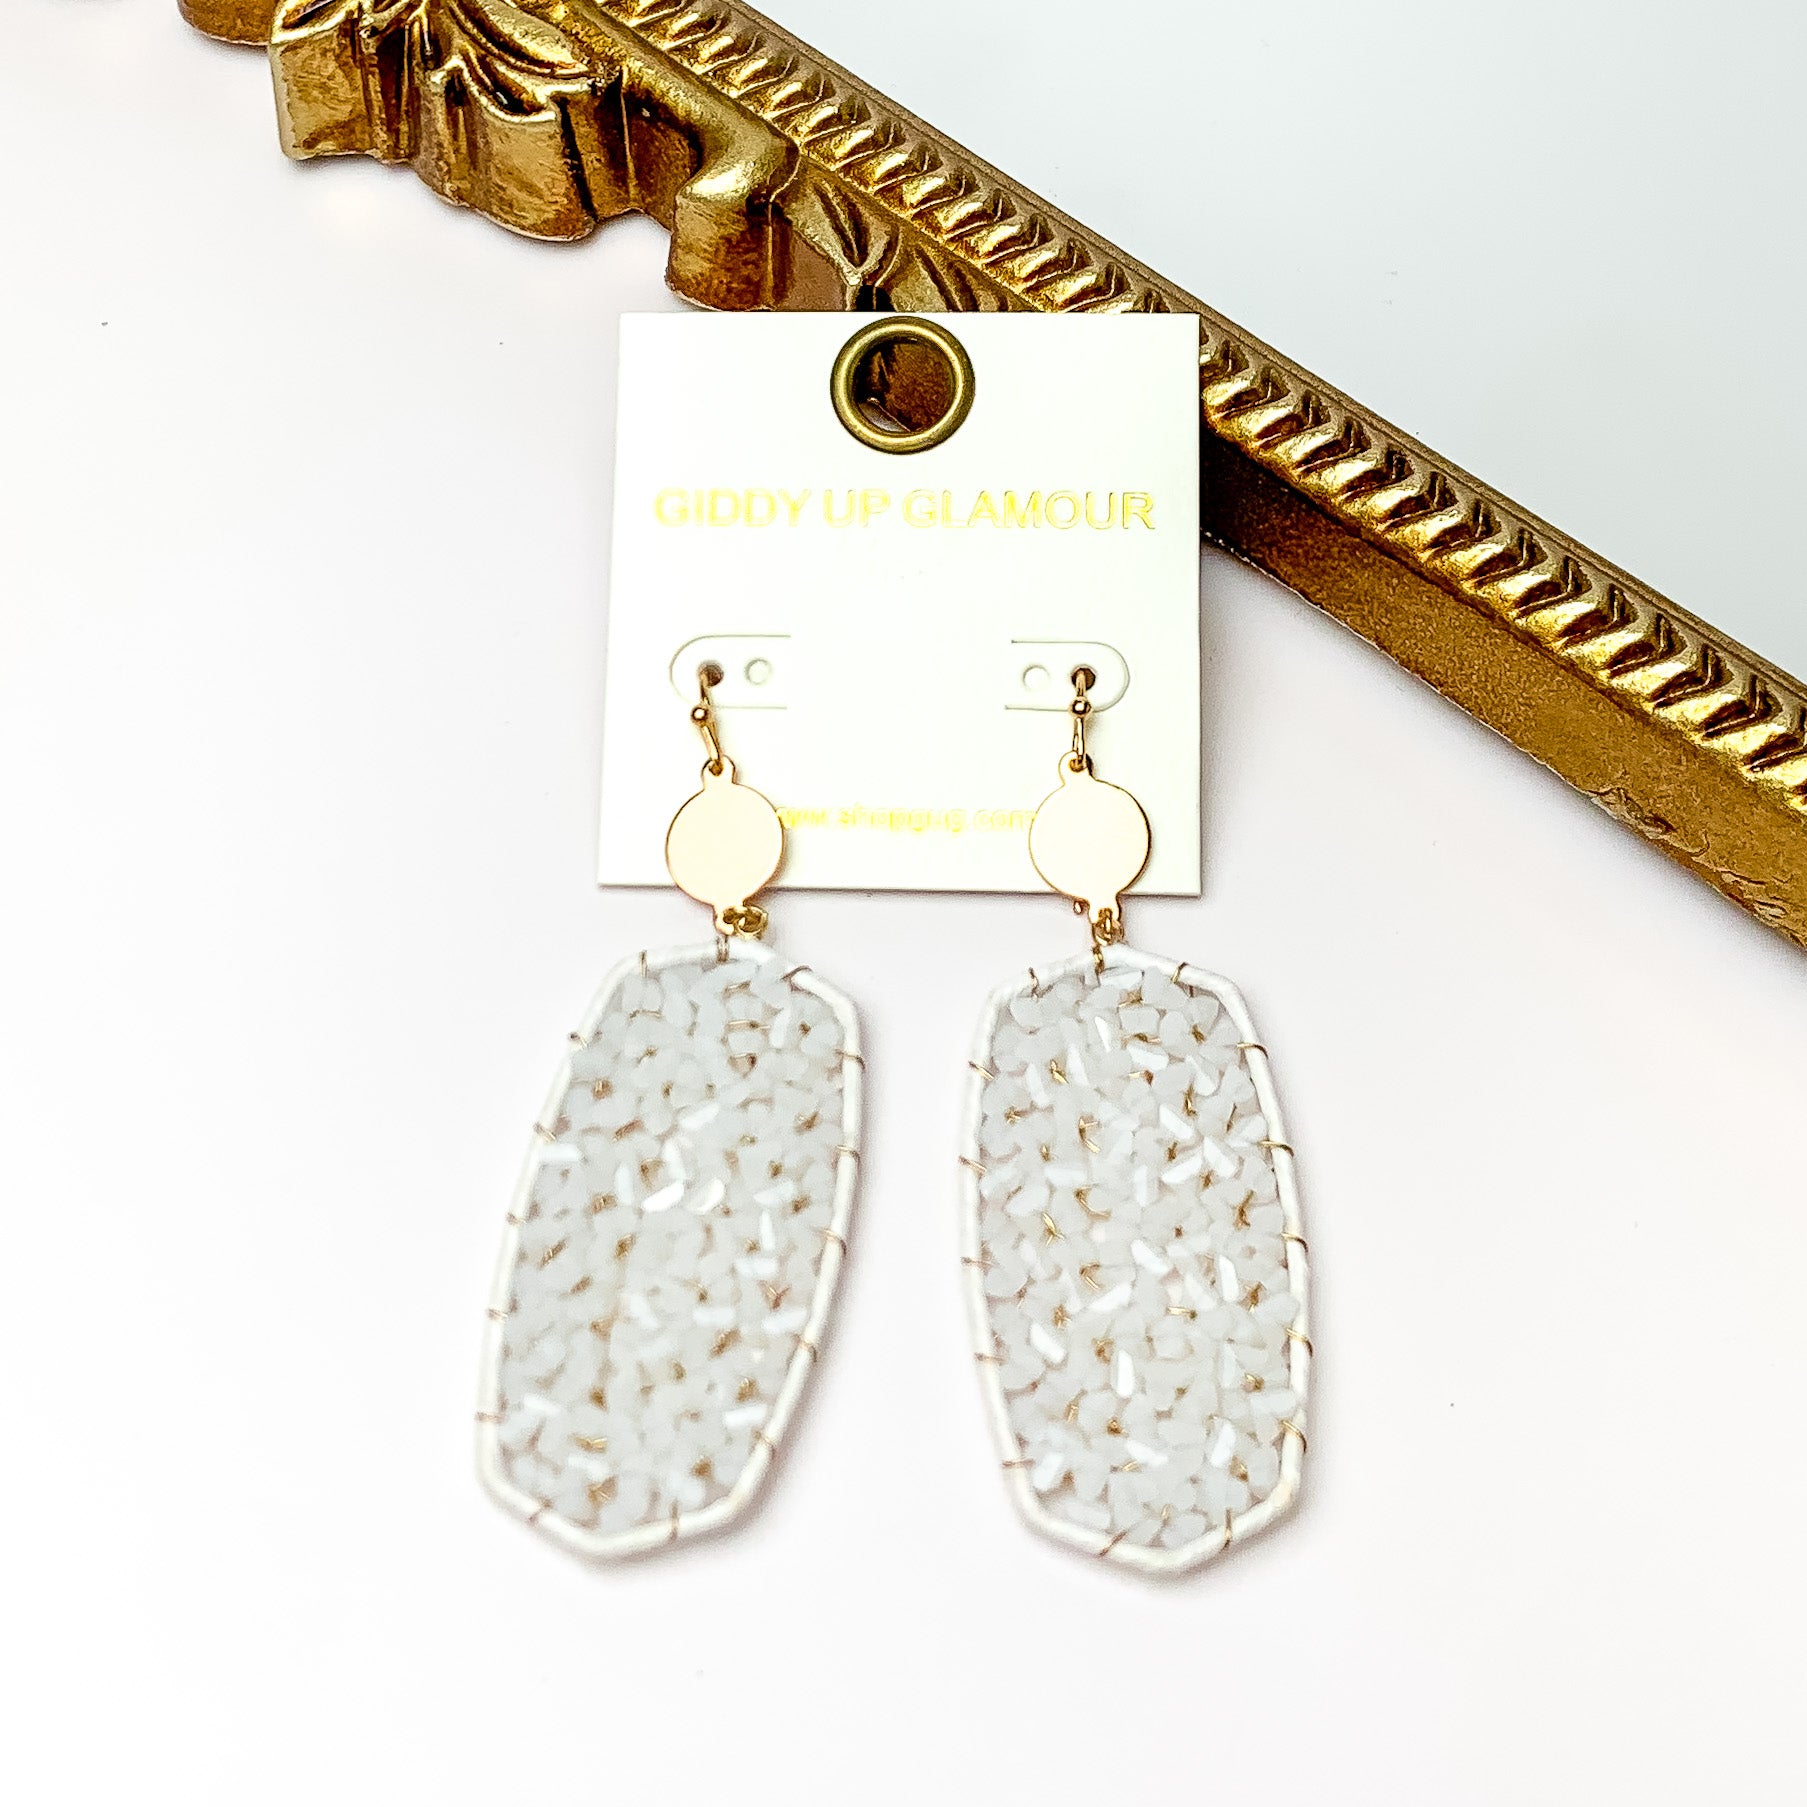 White Large Drop Earring with Gold Tone Accessory. Pictured on a white background with a gold frame through it